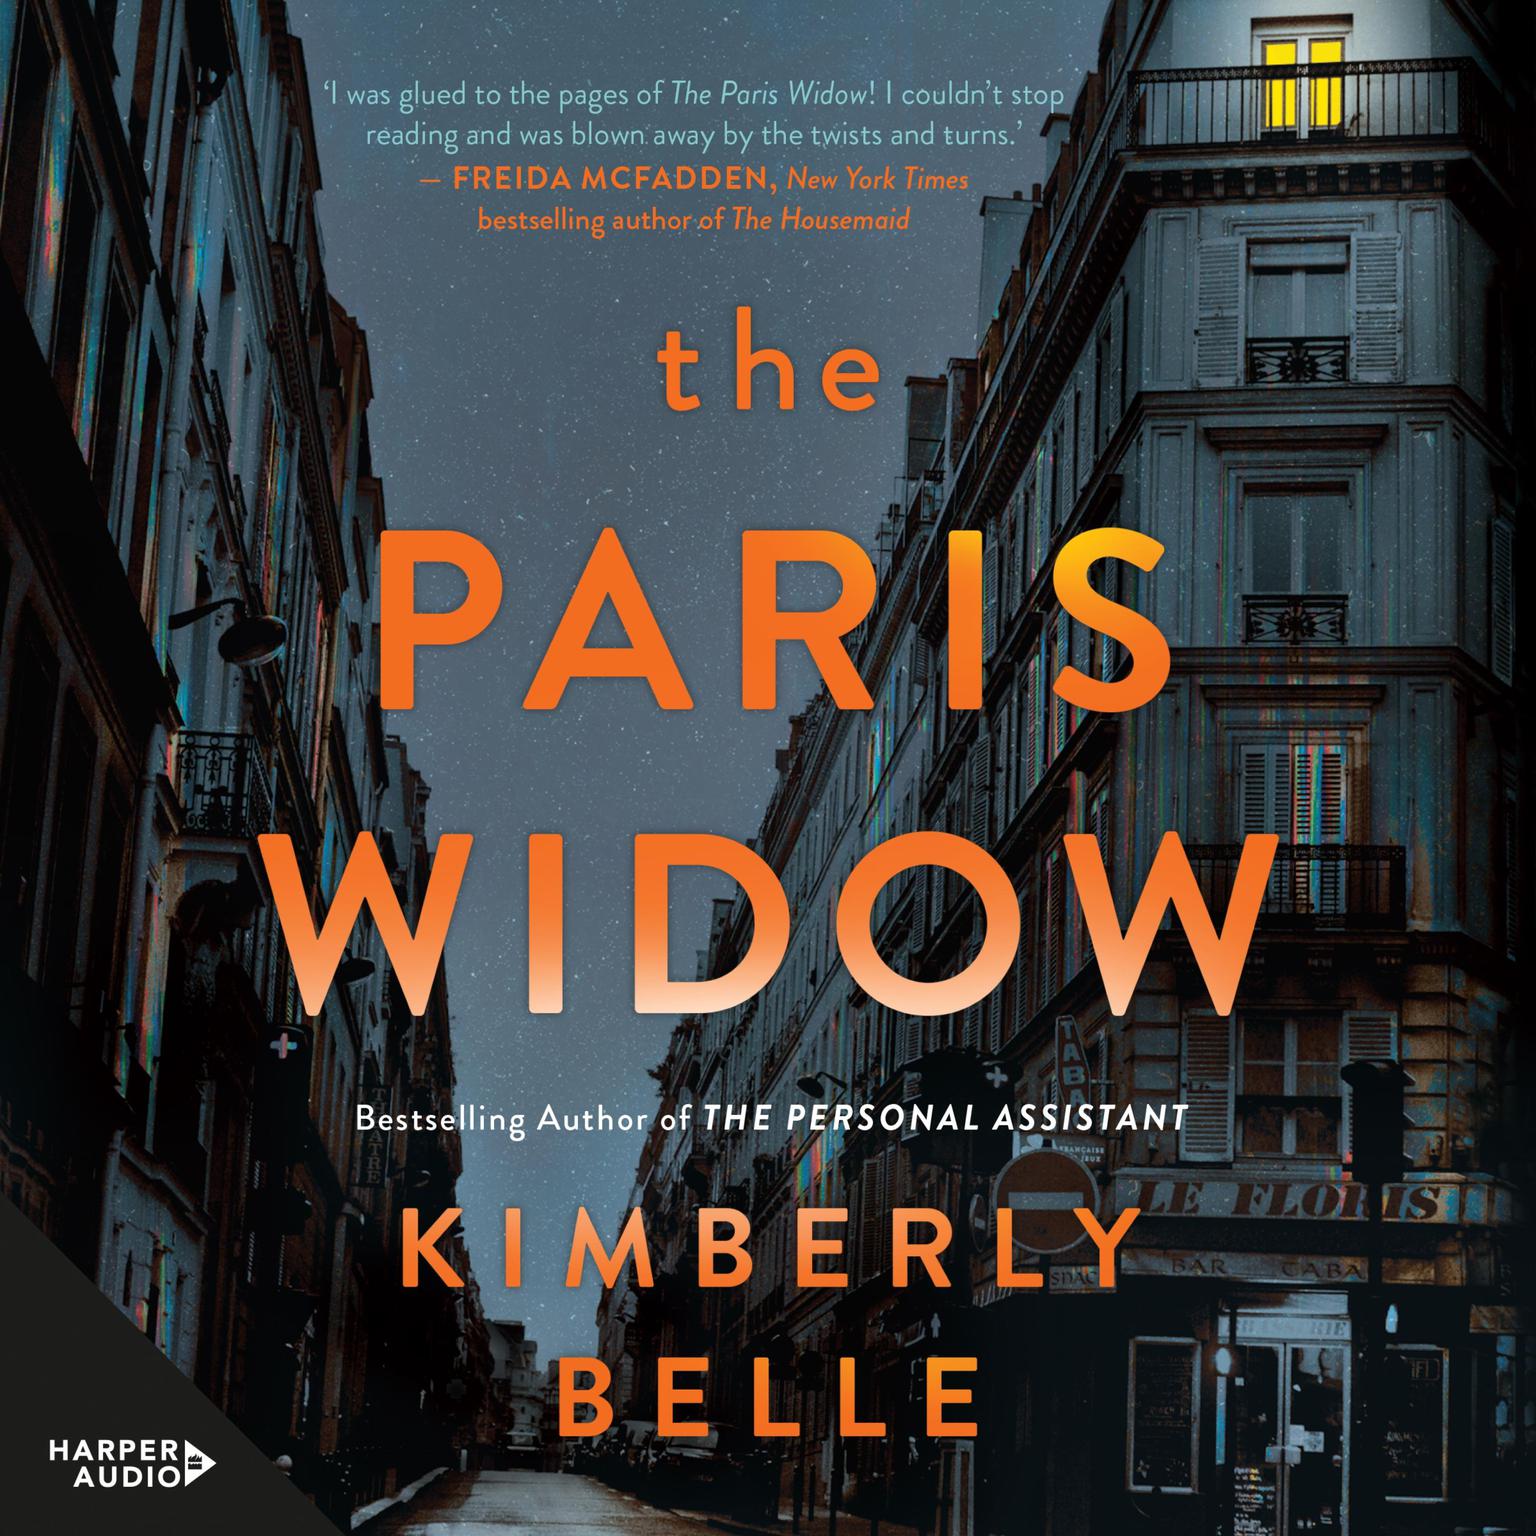 The Paris Widow Audiobook, by Kimberly Belle